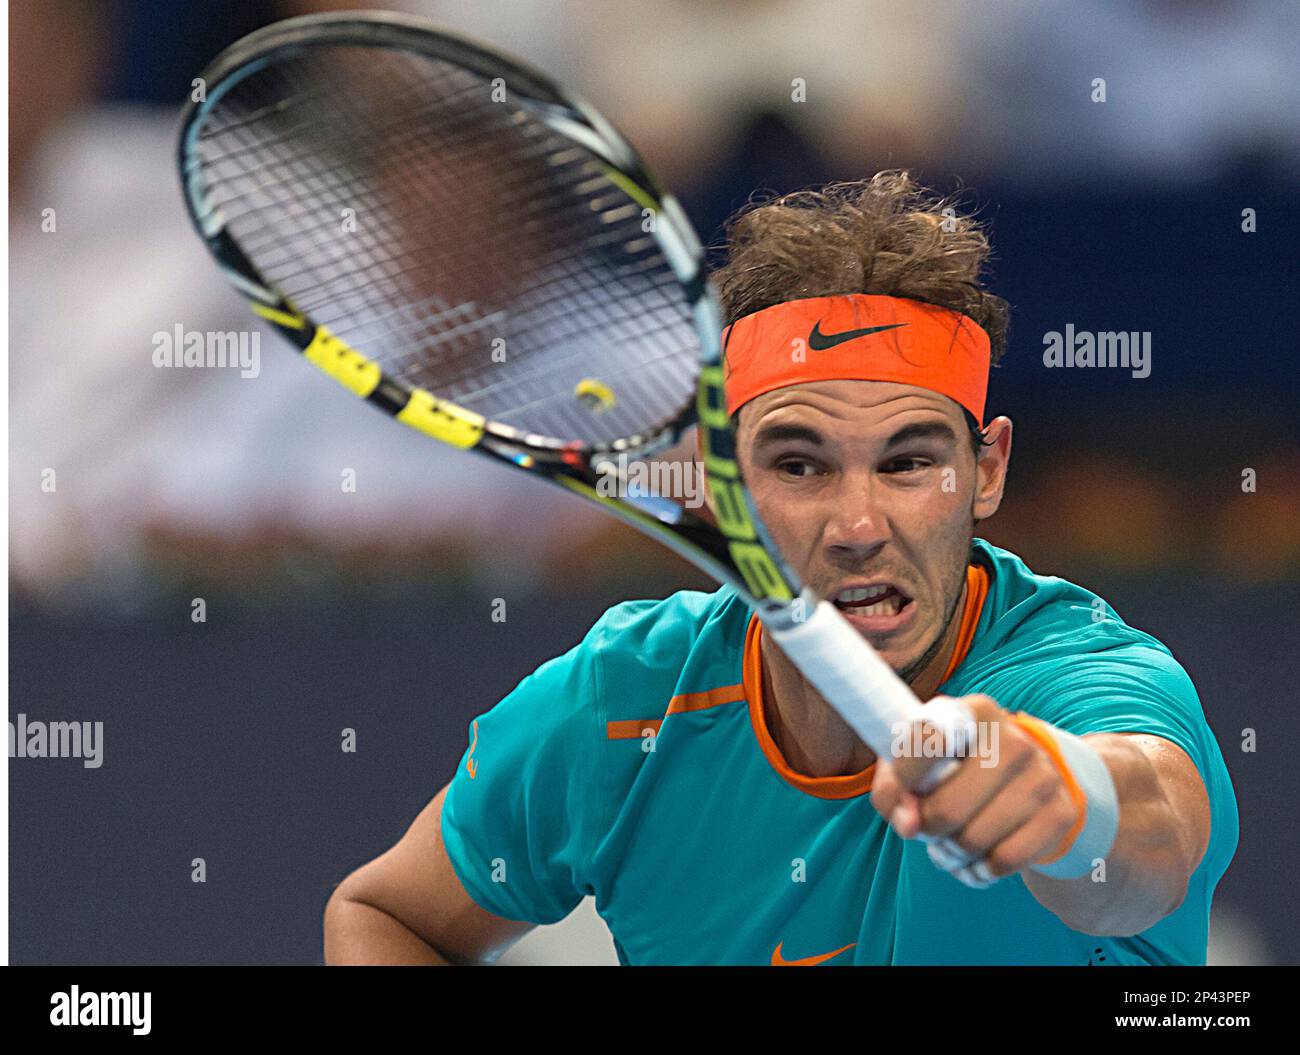 Spain's Rafael Nadal returns a ball to Italy's Simone Bolelli during their  first round match at the Swiss Indoors tennis tournament at the St.  Jakobshalle in Basel, Switzerland, on Monday, Oct. 20,